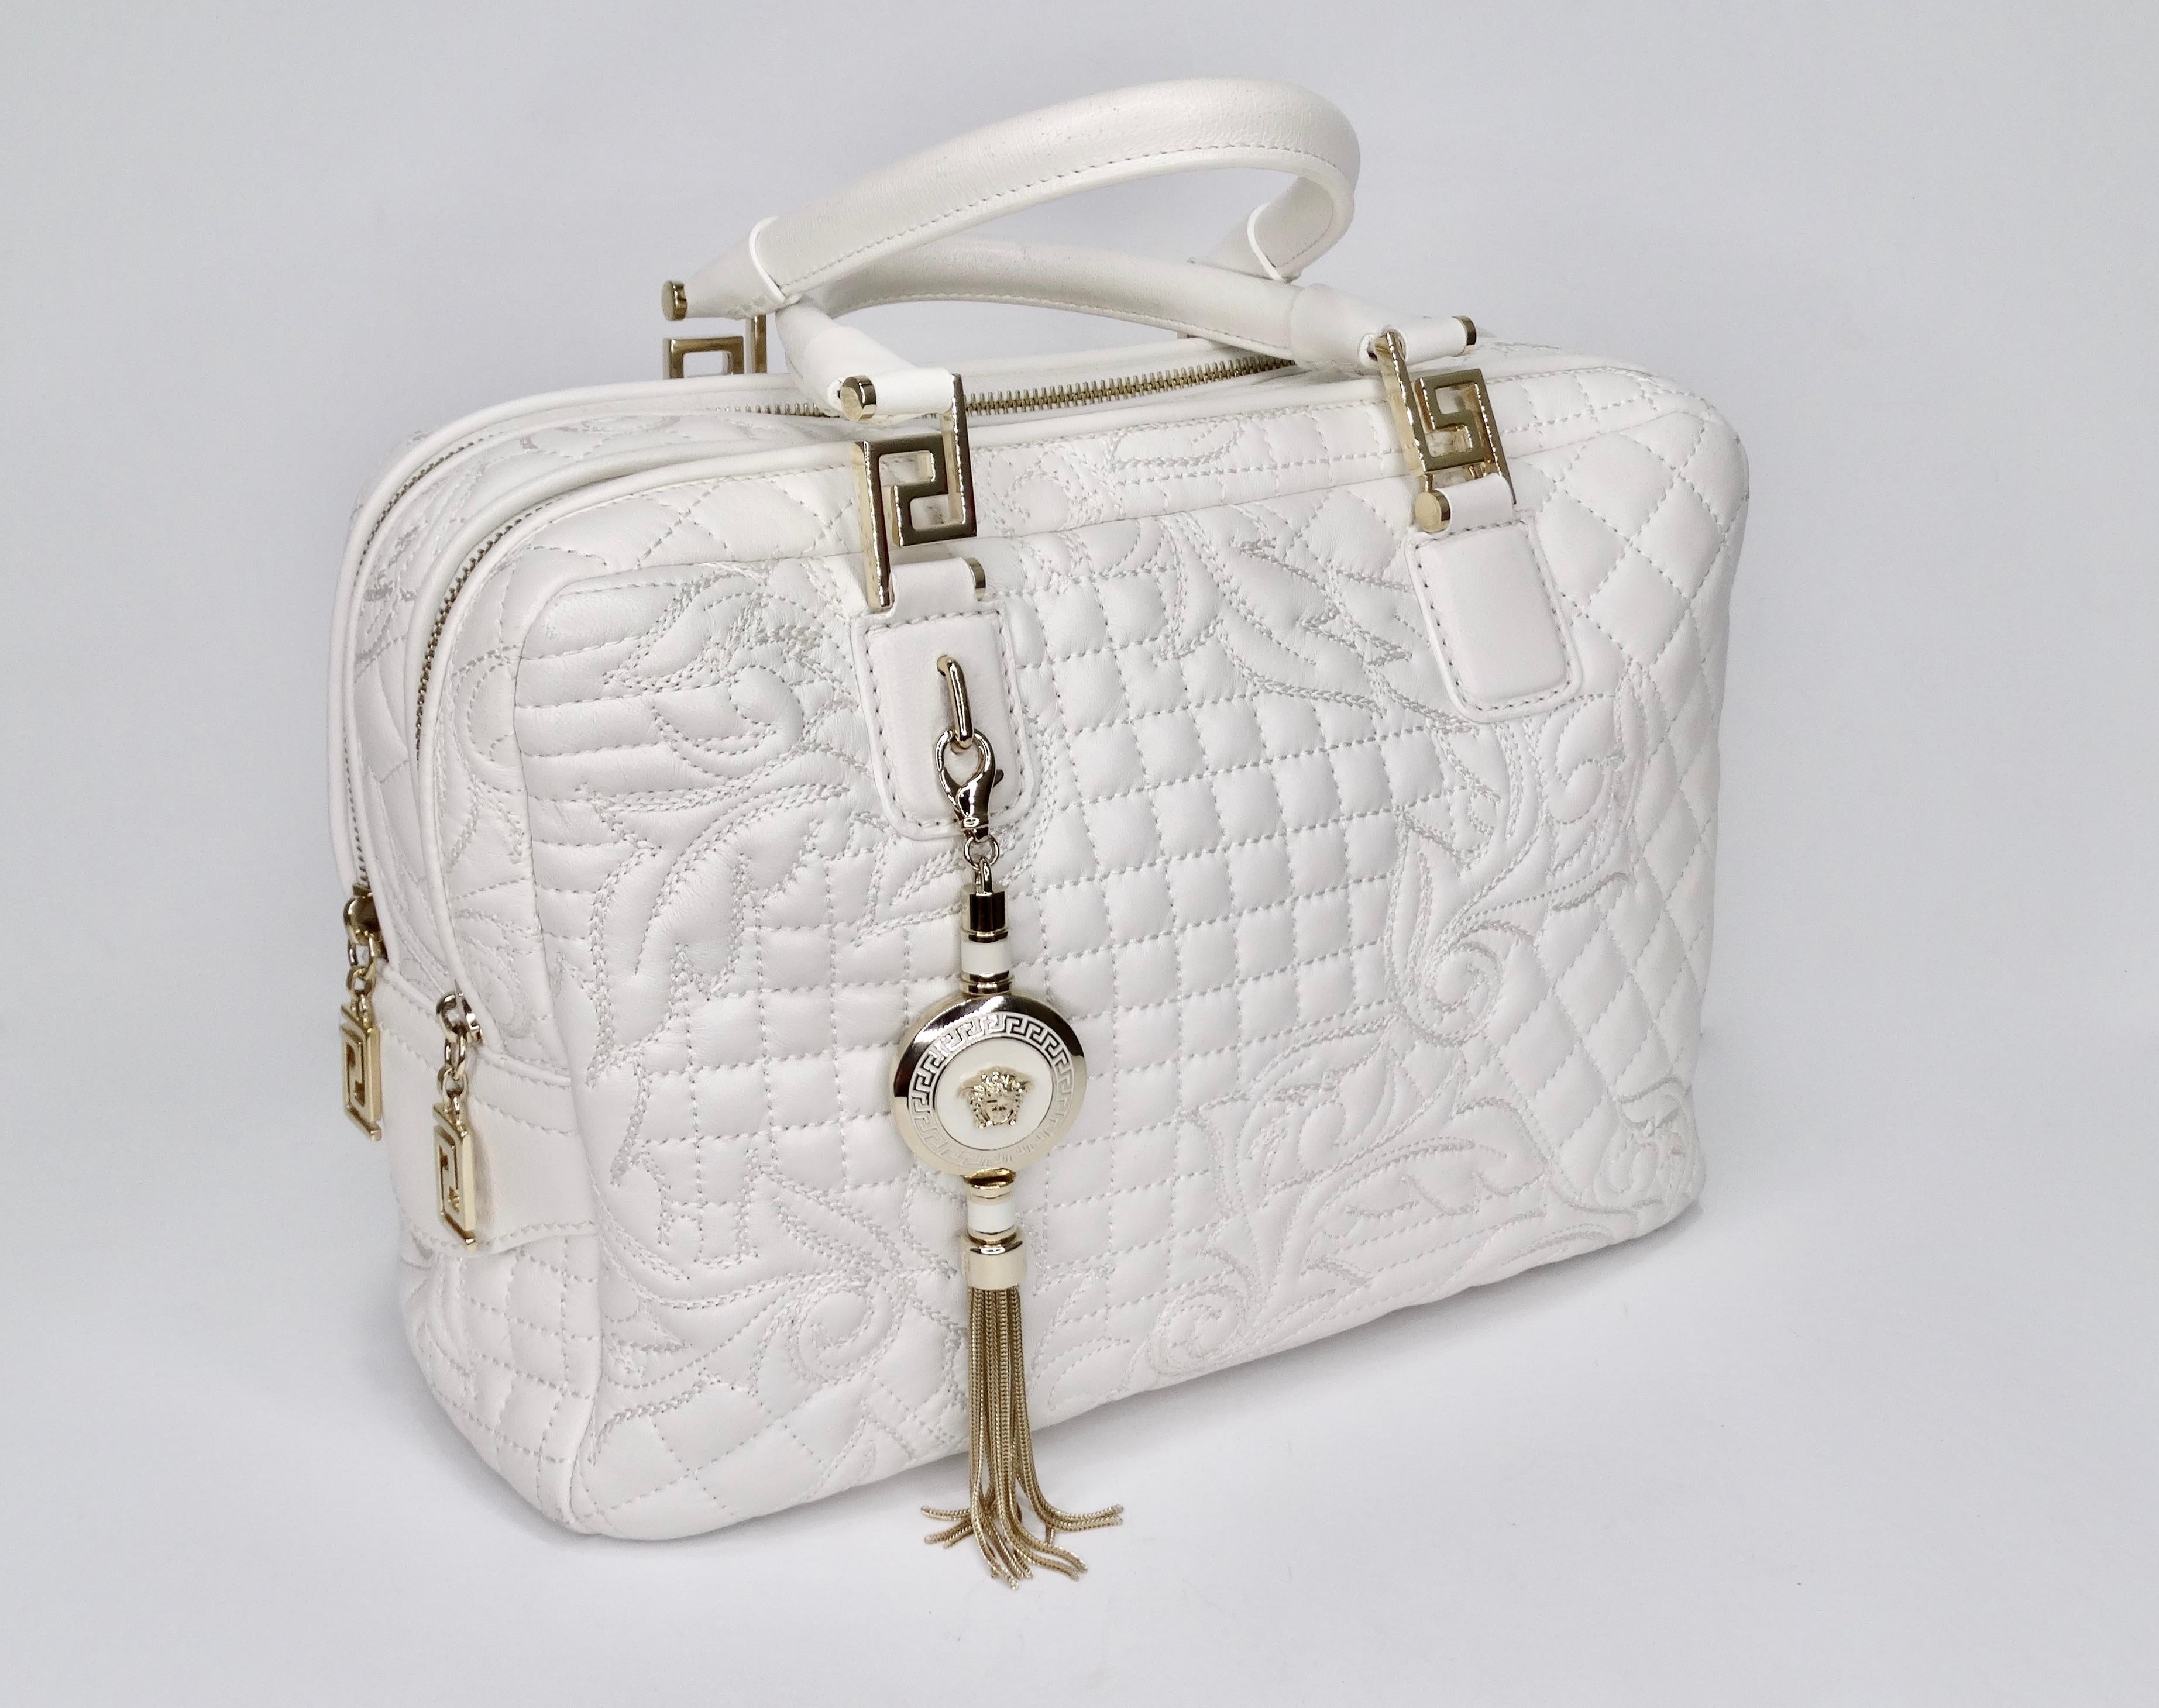 Calling all Versace lovers! Circa mid 2000s, this handbag is crafted from white leather and features quilted stitching with the signature Versace Baroque pattern, dual rolled handles, optional shoulder strap, gold toned Greek Key hardware and two